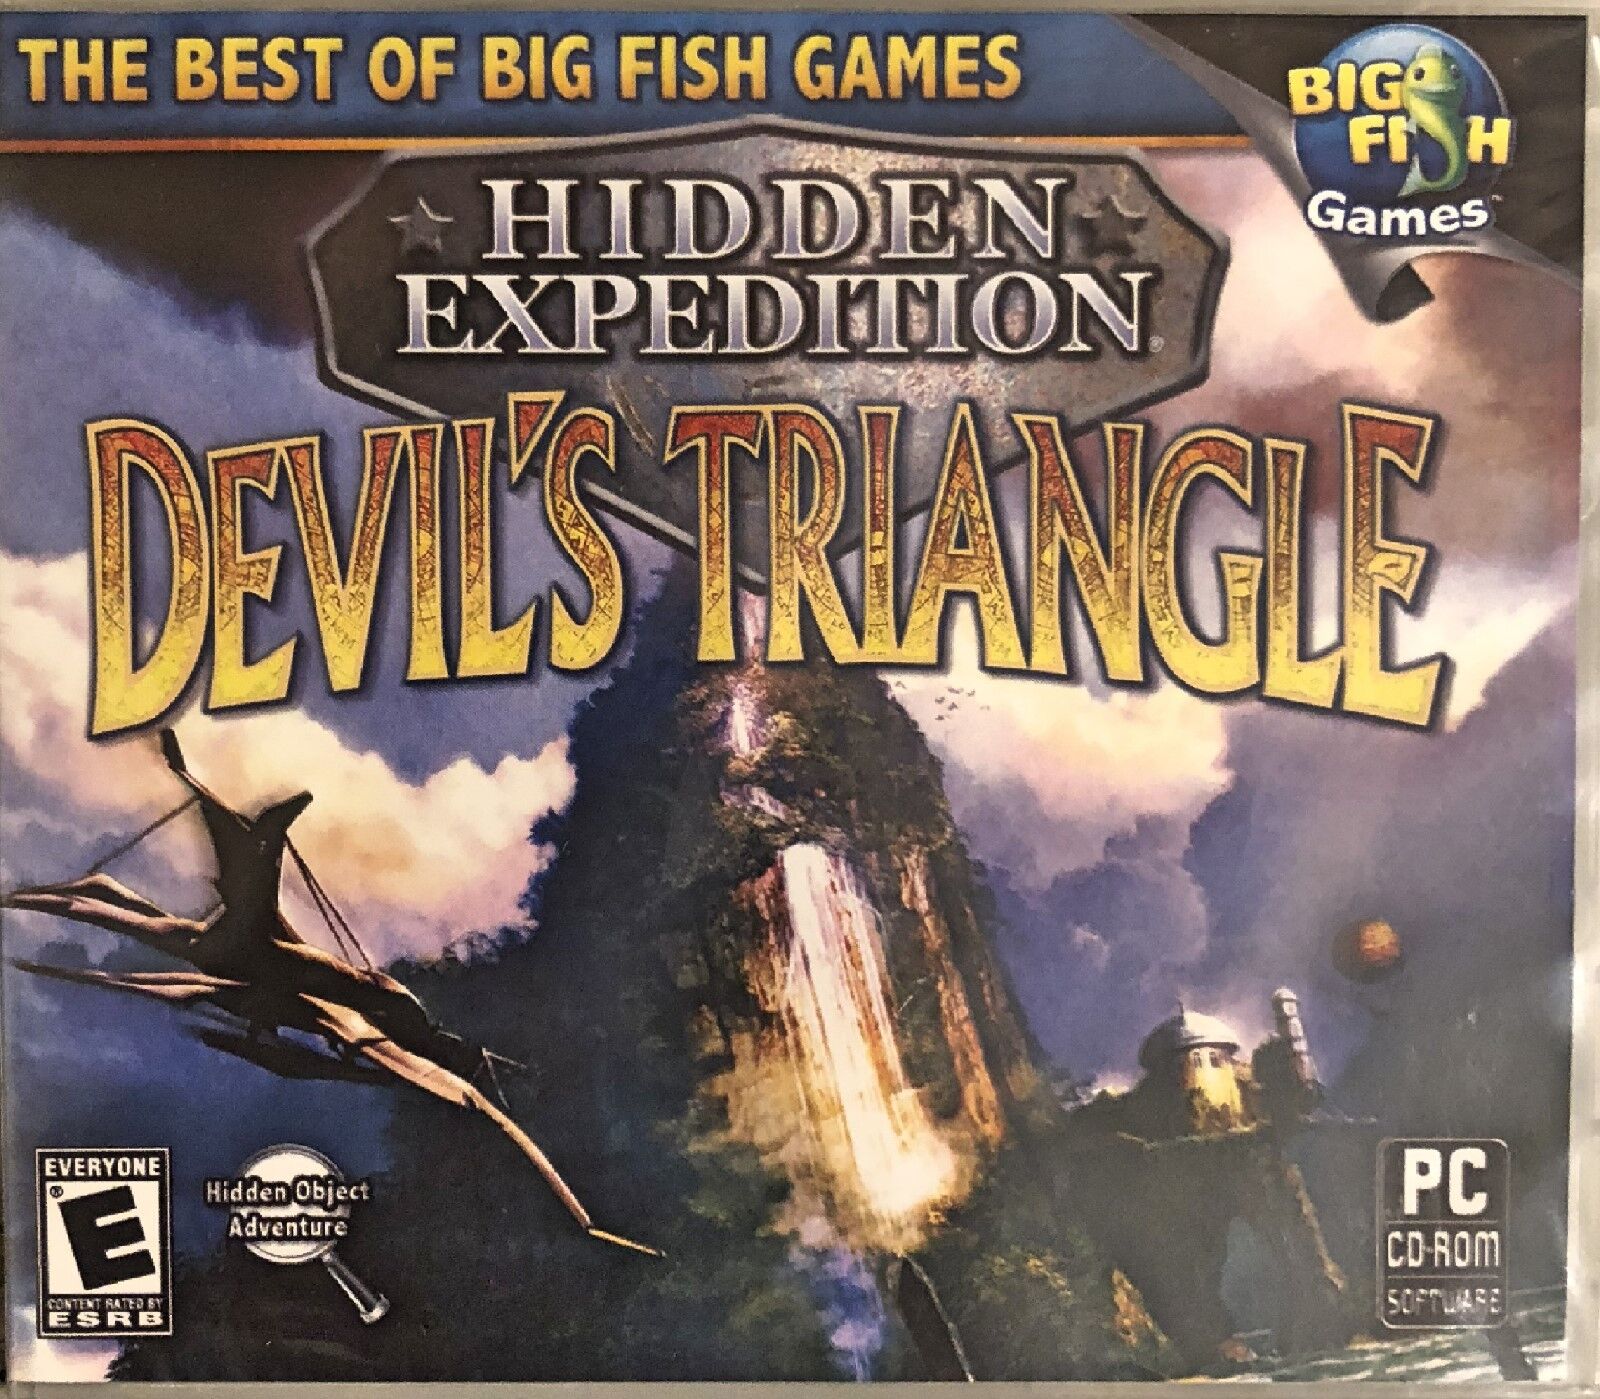 Clever Hidden Expedition Devils Triangle Pc Brand New Win8 7 XP Hidden Object Game on eBay